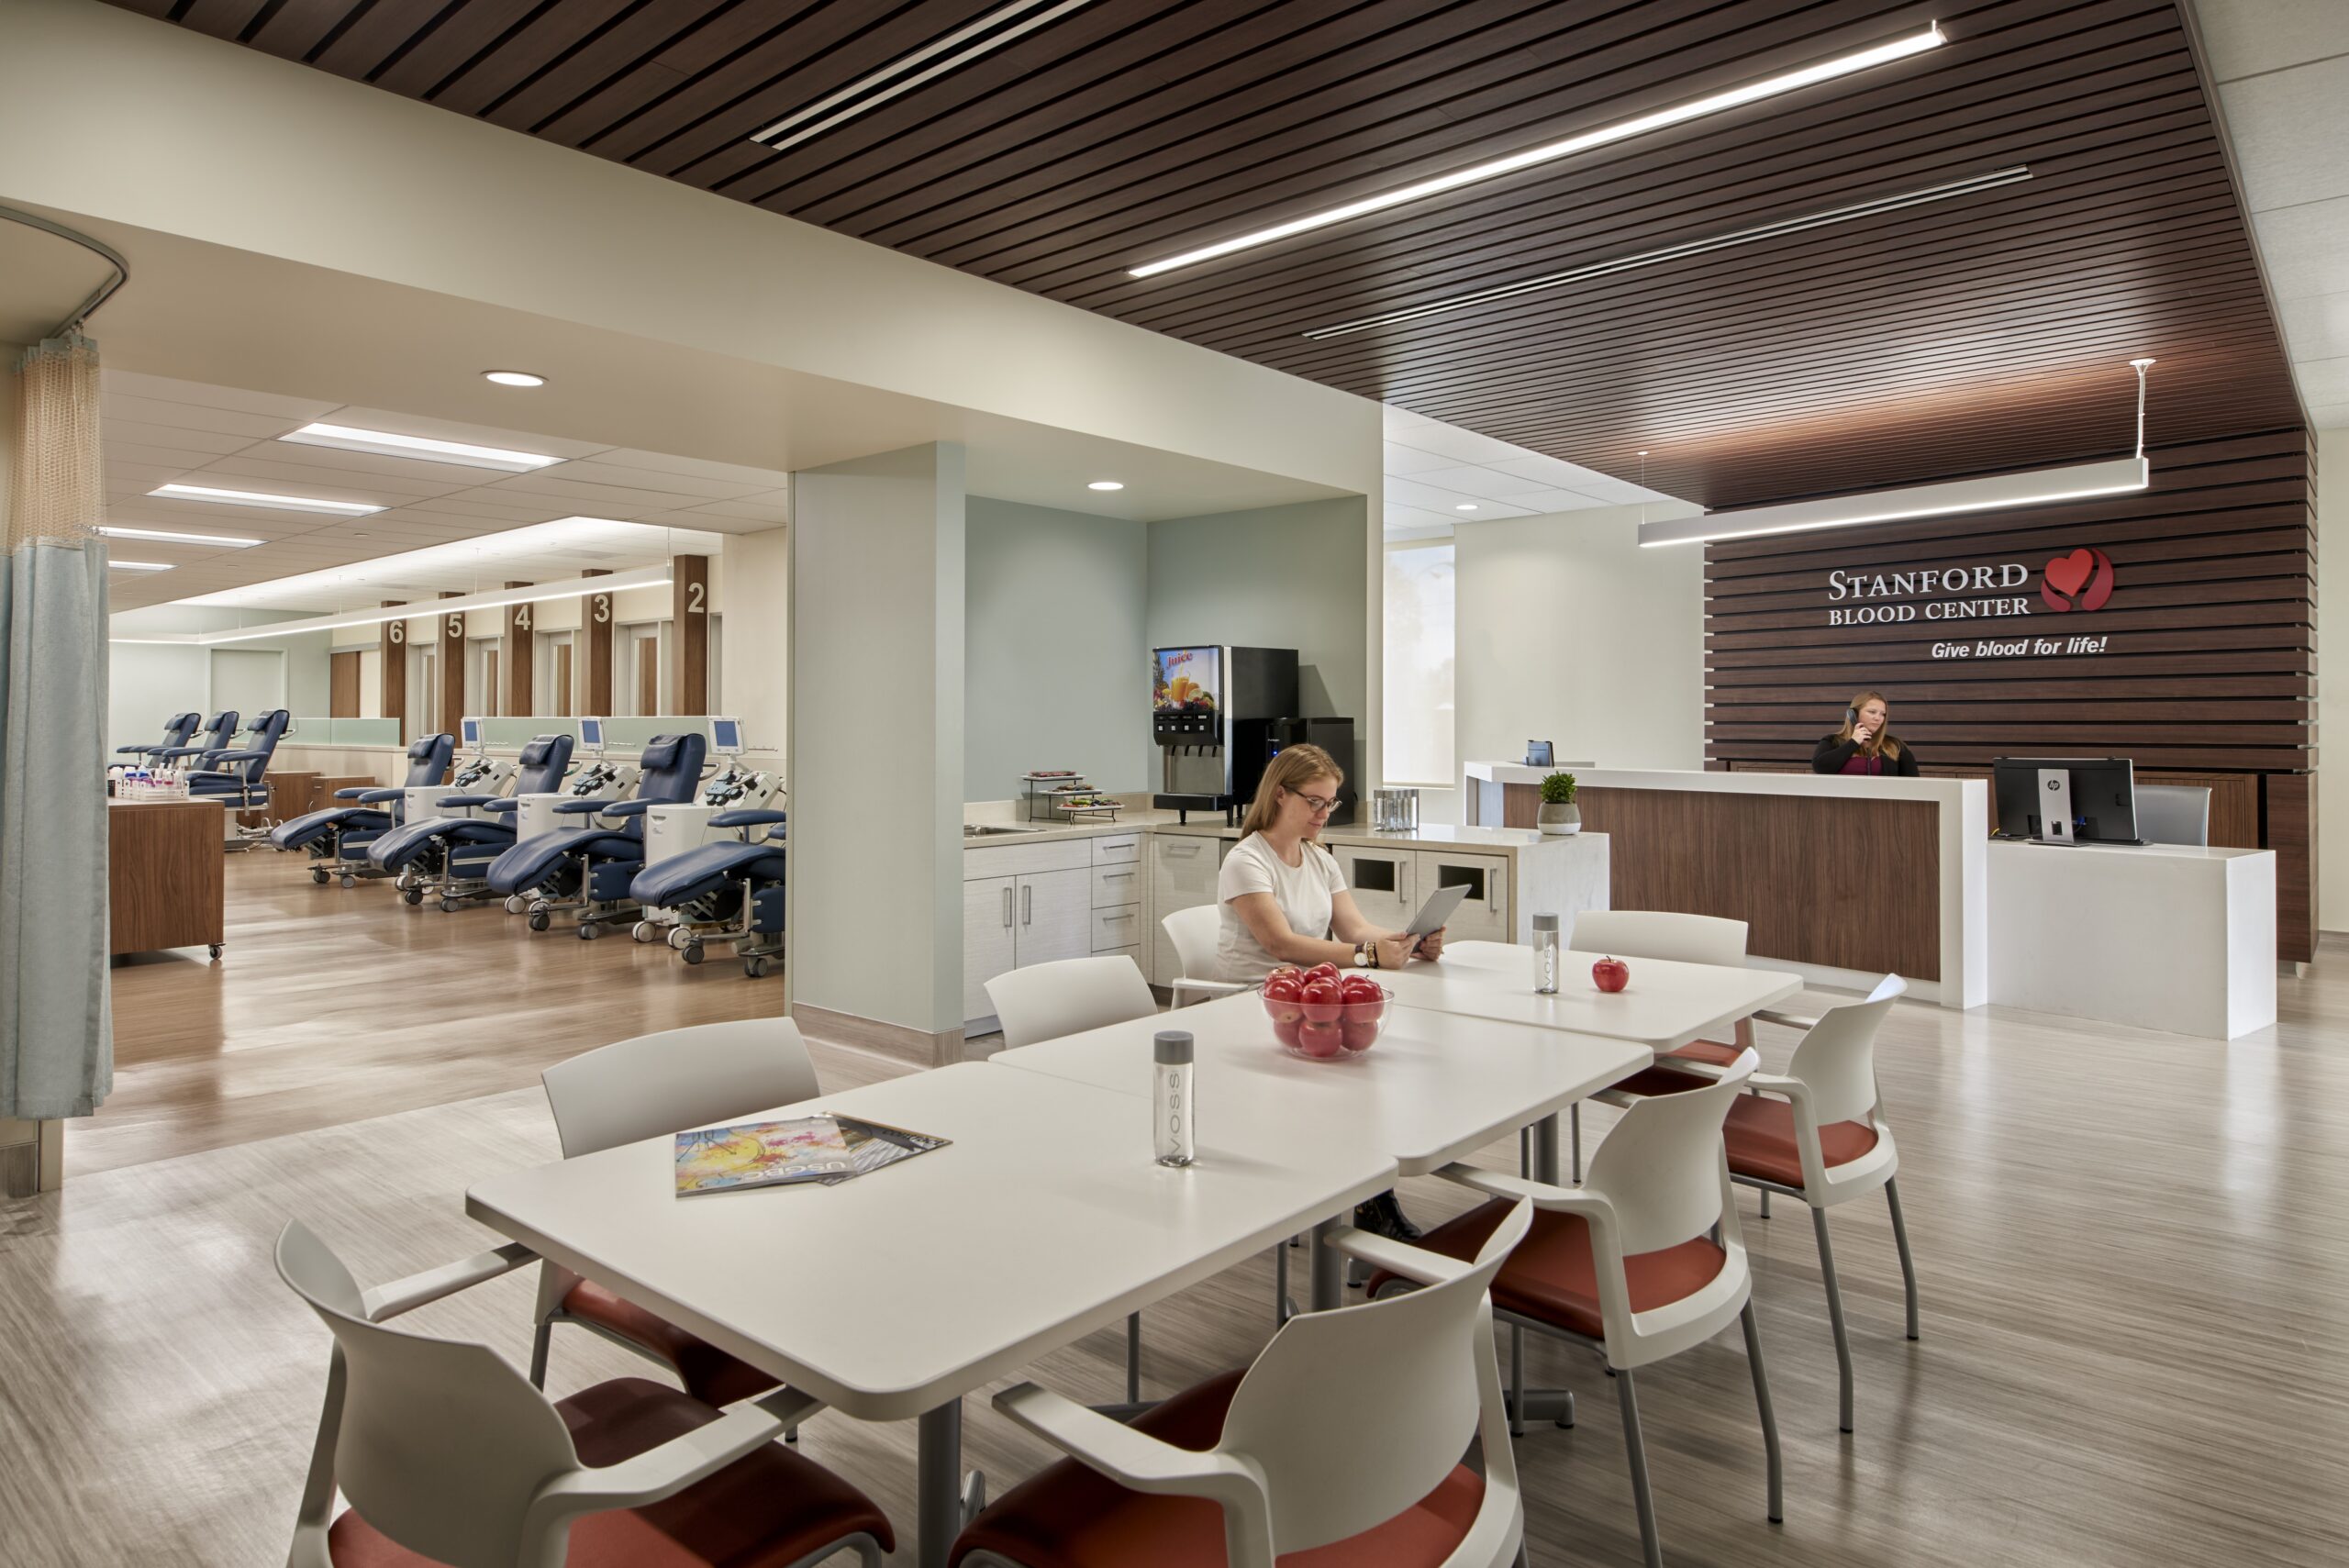 Stanford Blood Center - South Bay Donor Center